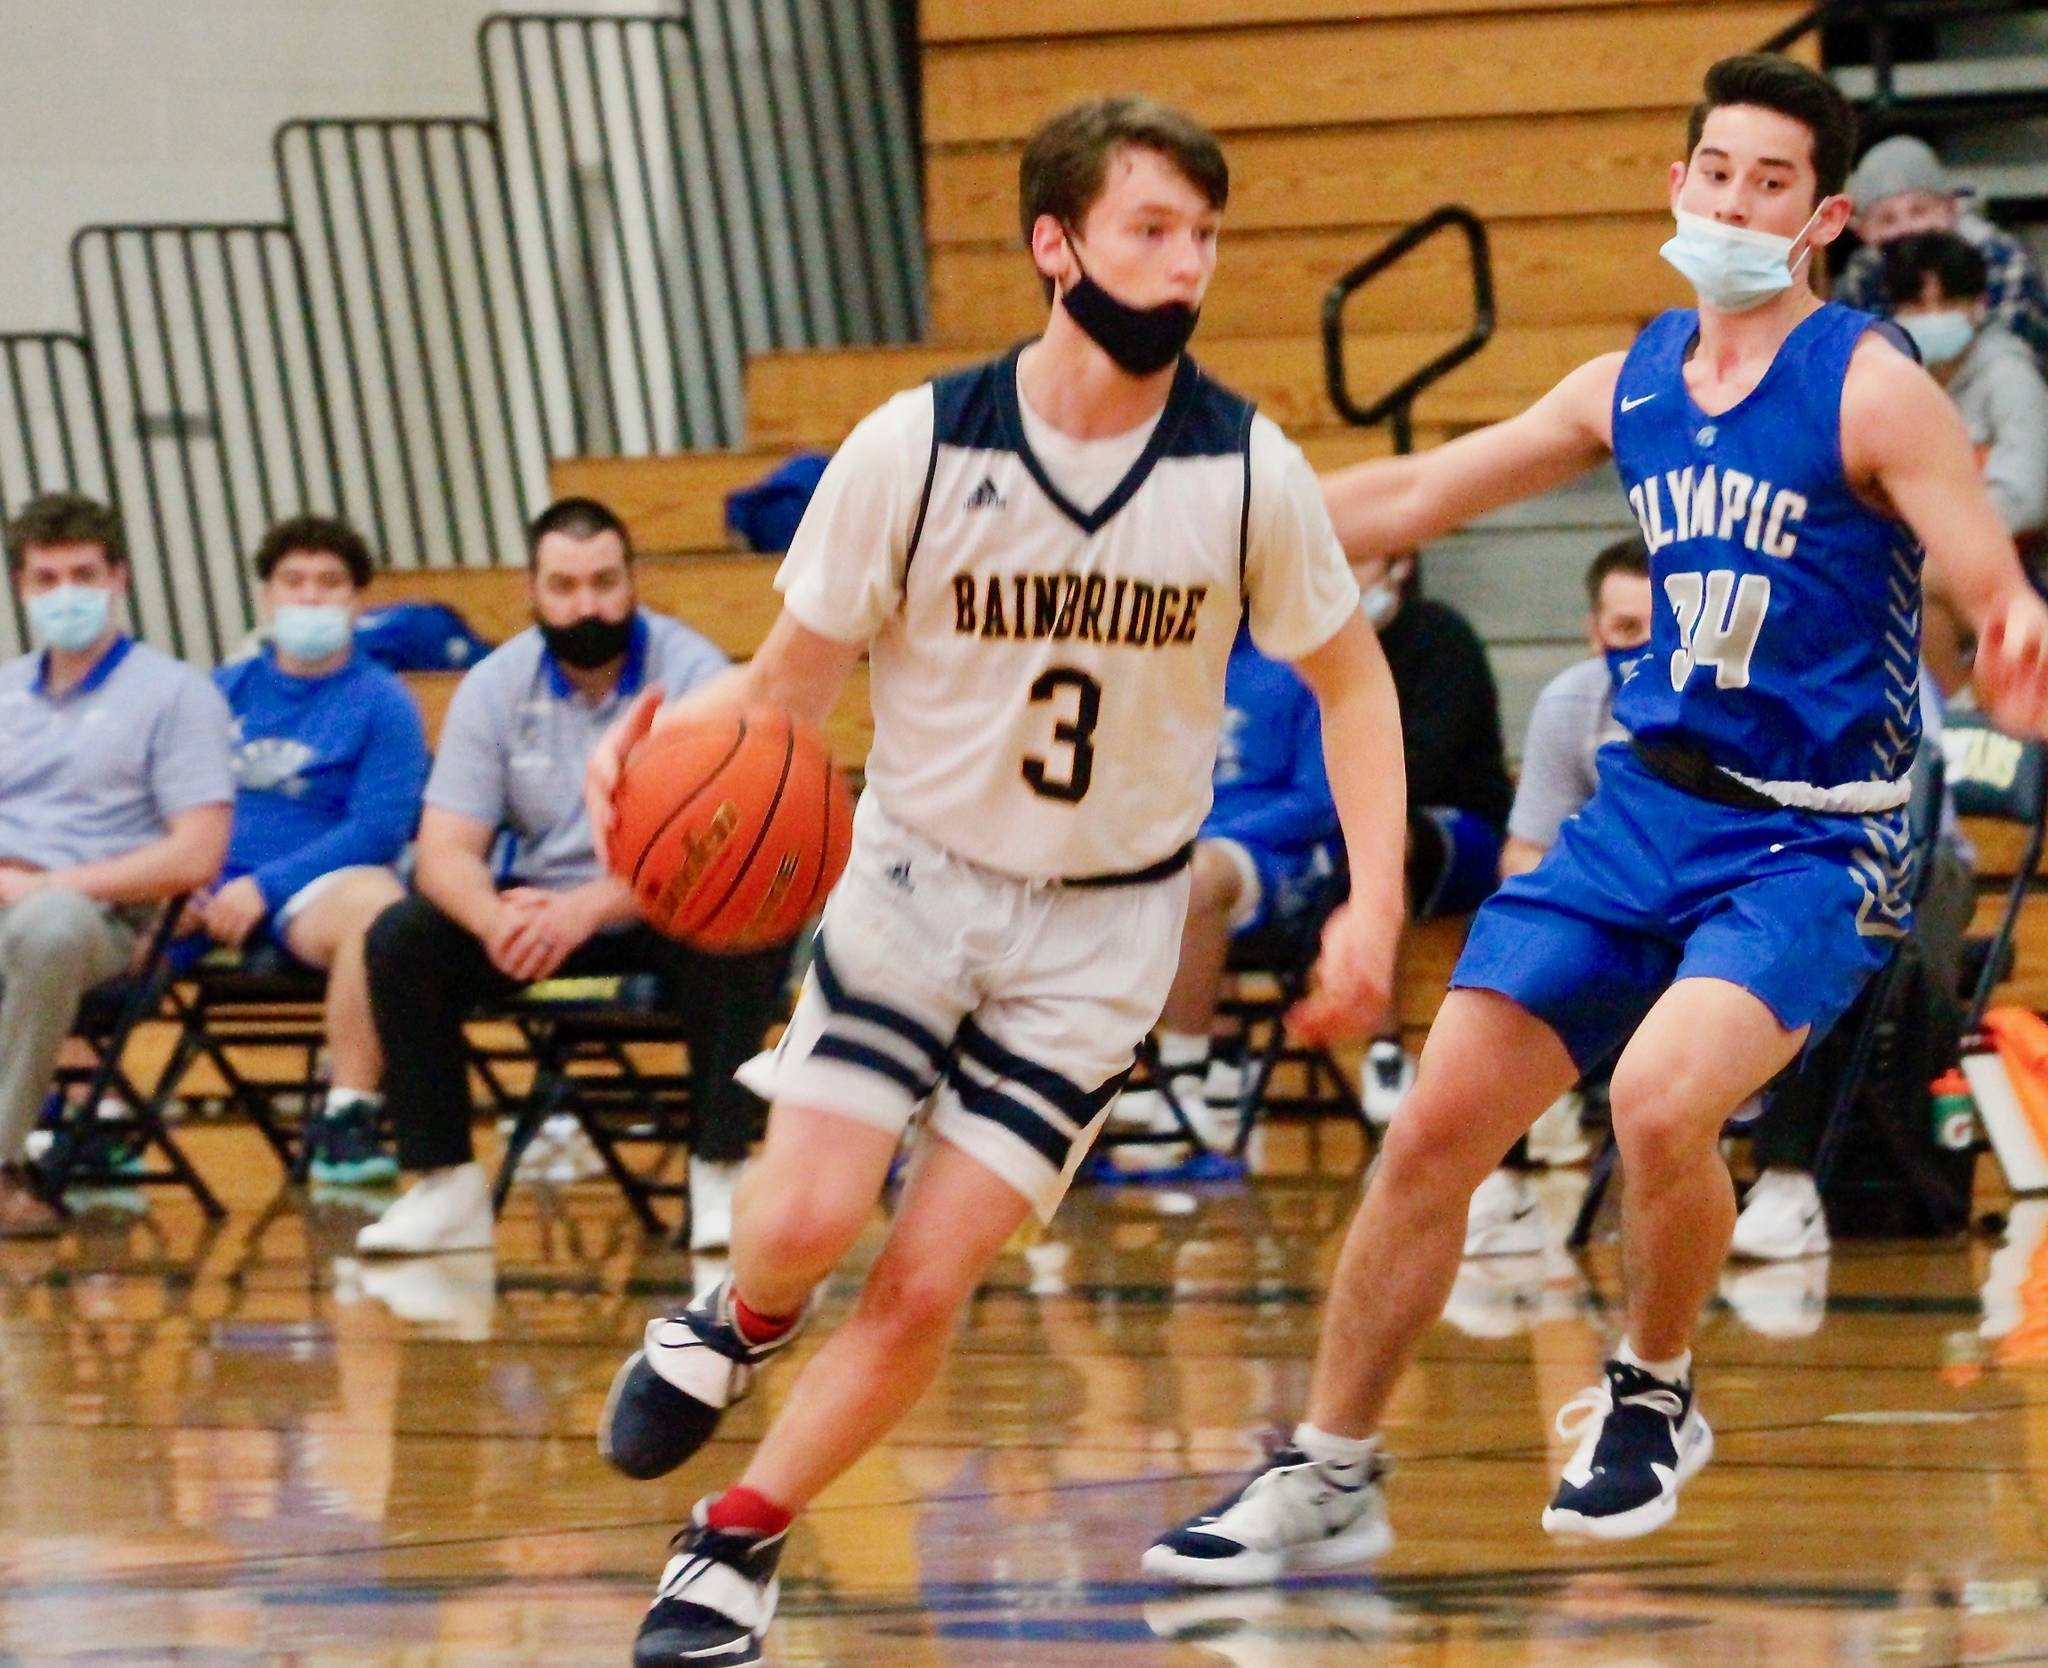 Cliff Hennessey led Bainbridge with 22 points in a 73-34 win over Olympic. (Mark Krulish/Kitsap News Group)